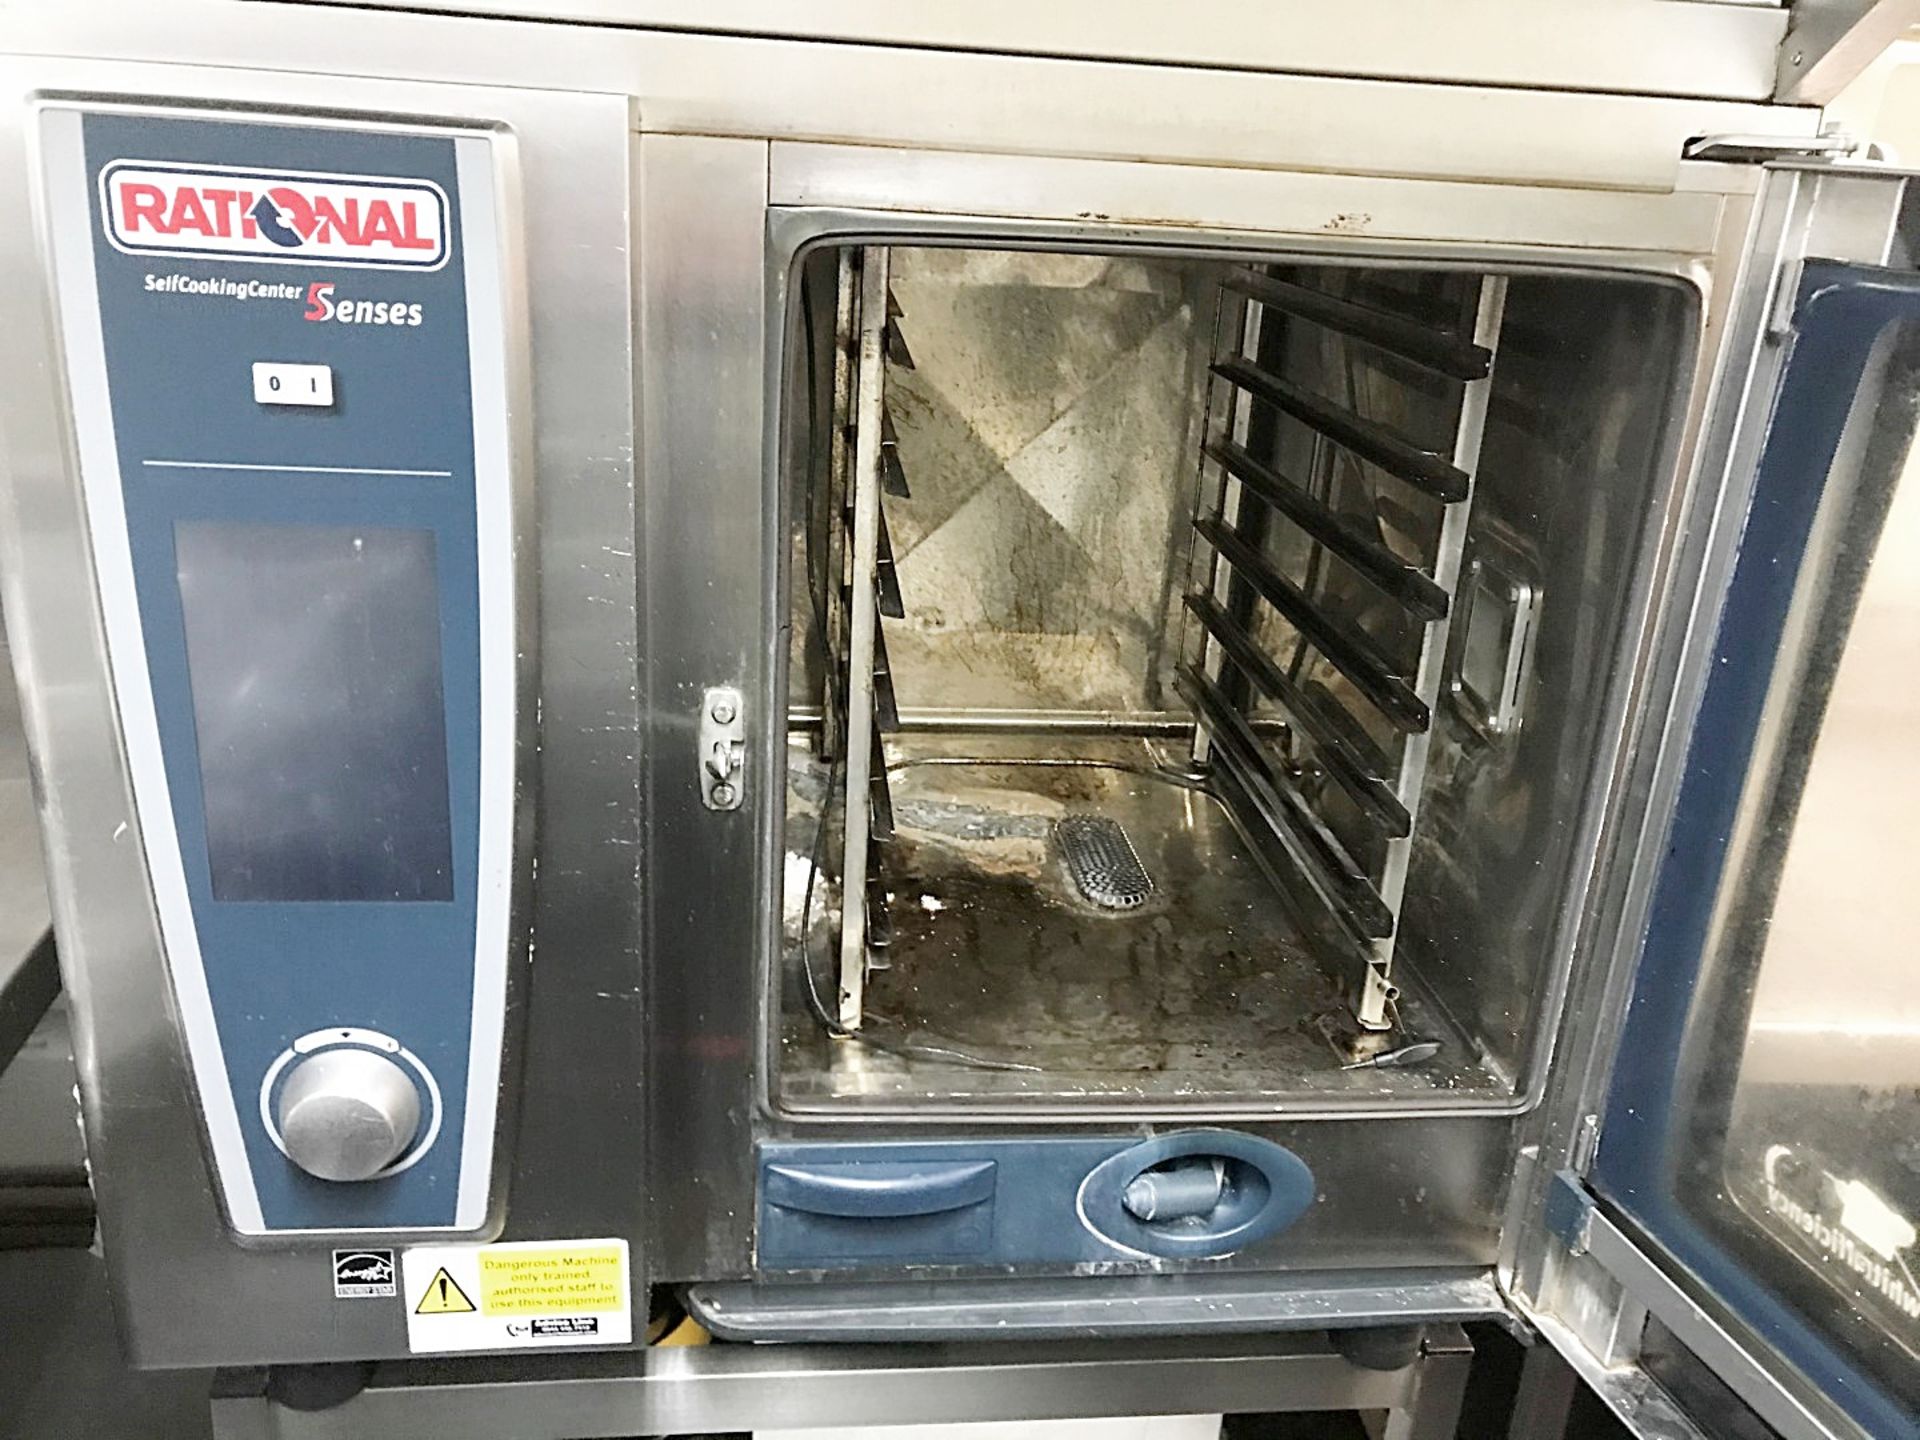 1 x Rational SCC WE 61 Combi Oven - Includes Stand and Hood - 3 Phase - CL554 - Ref IM289 - Loc - Image 4 of 10